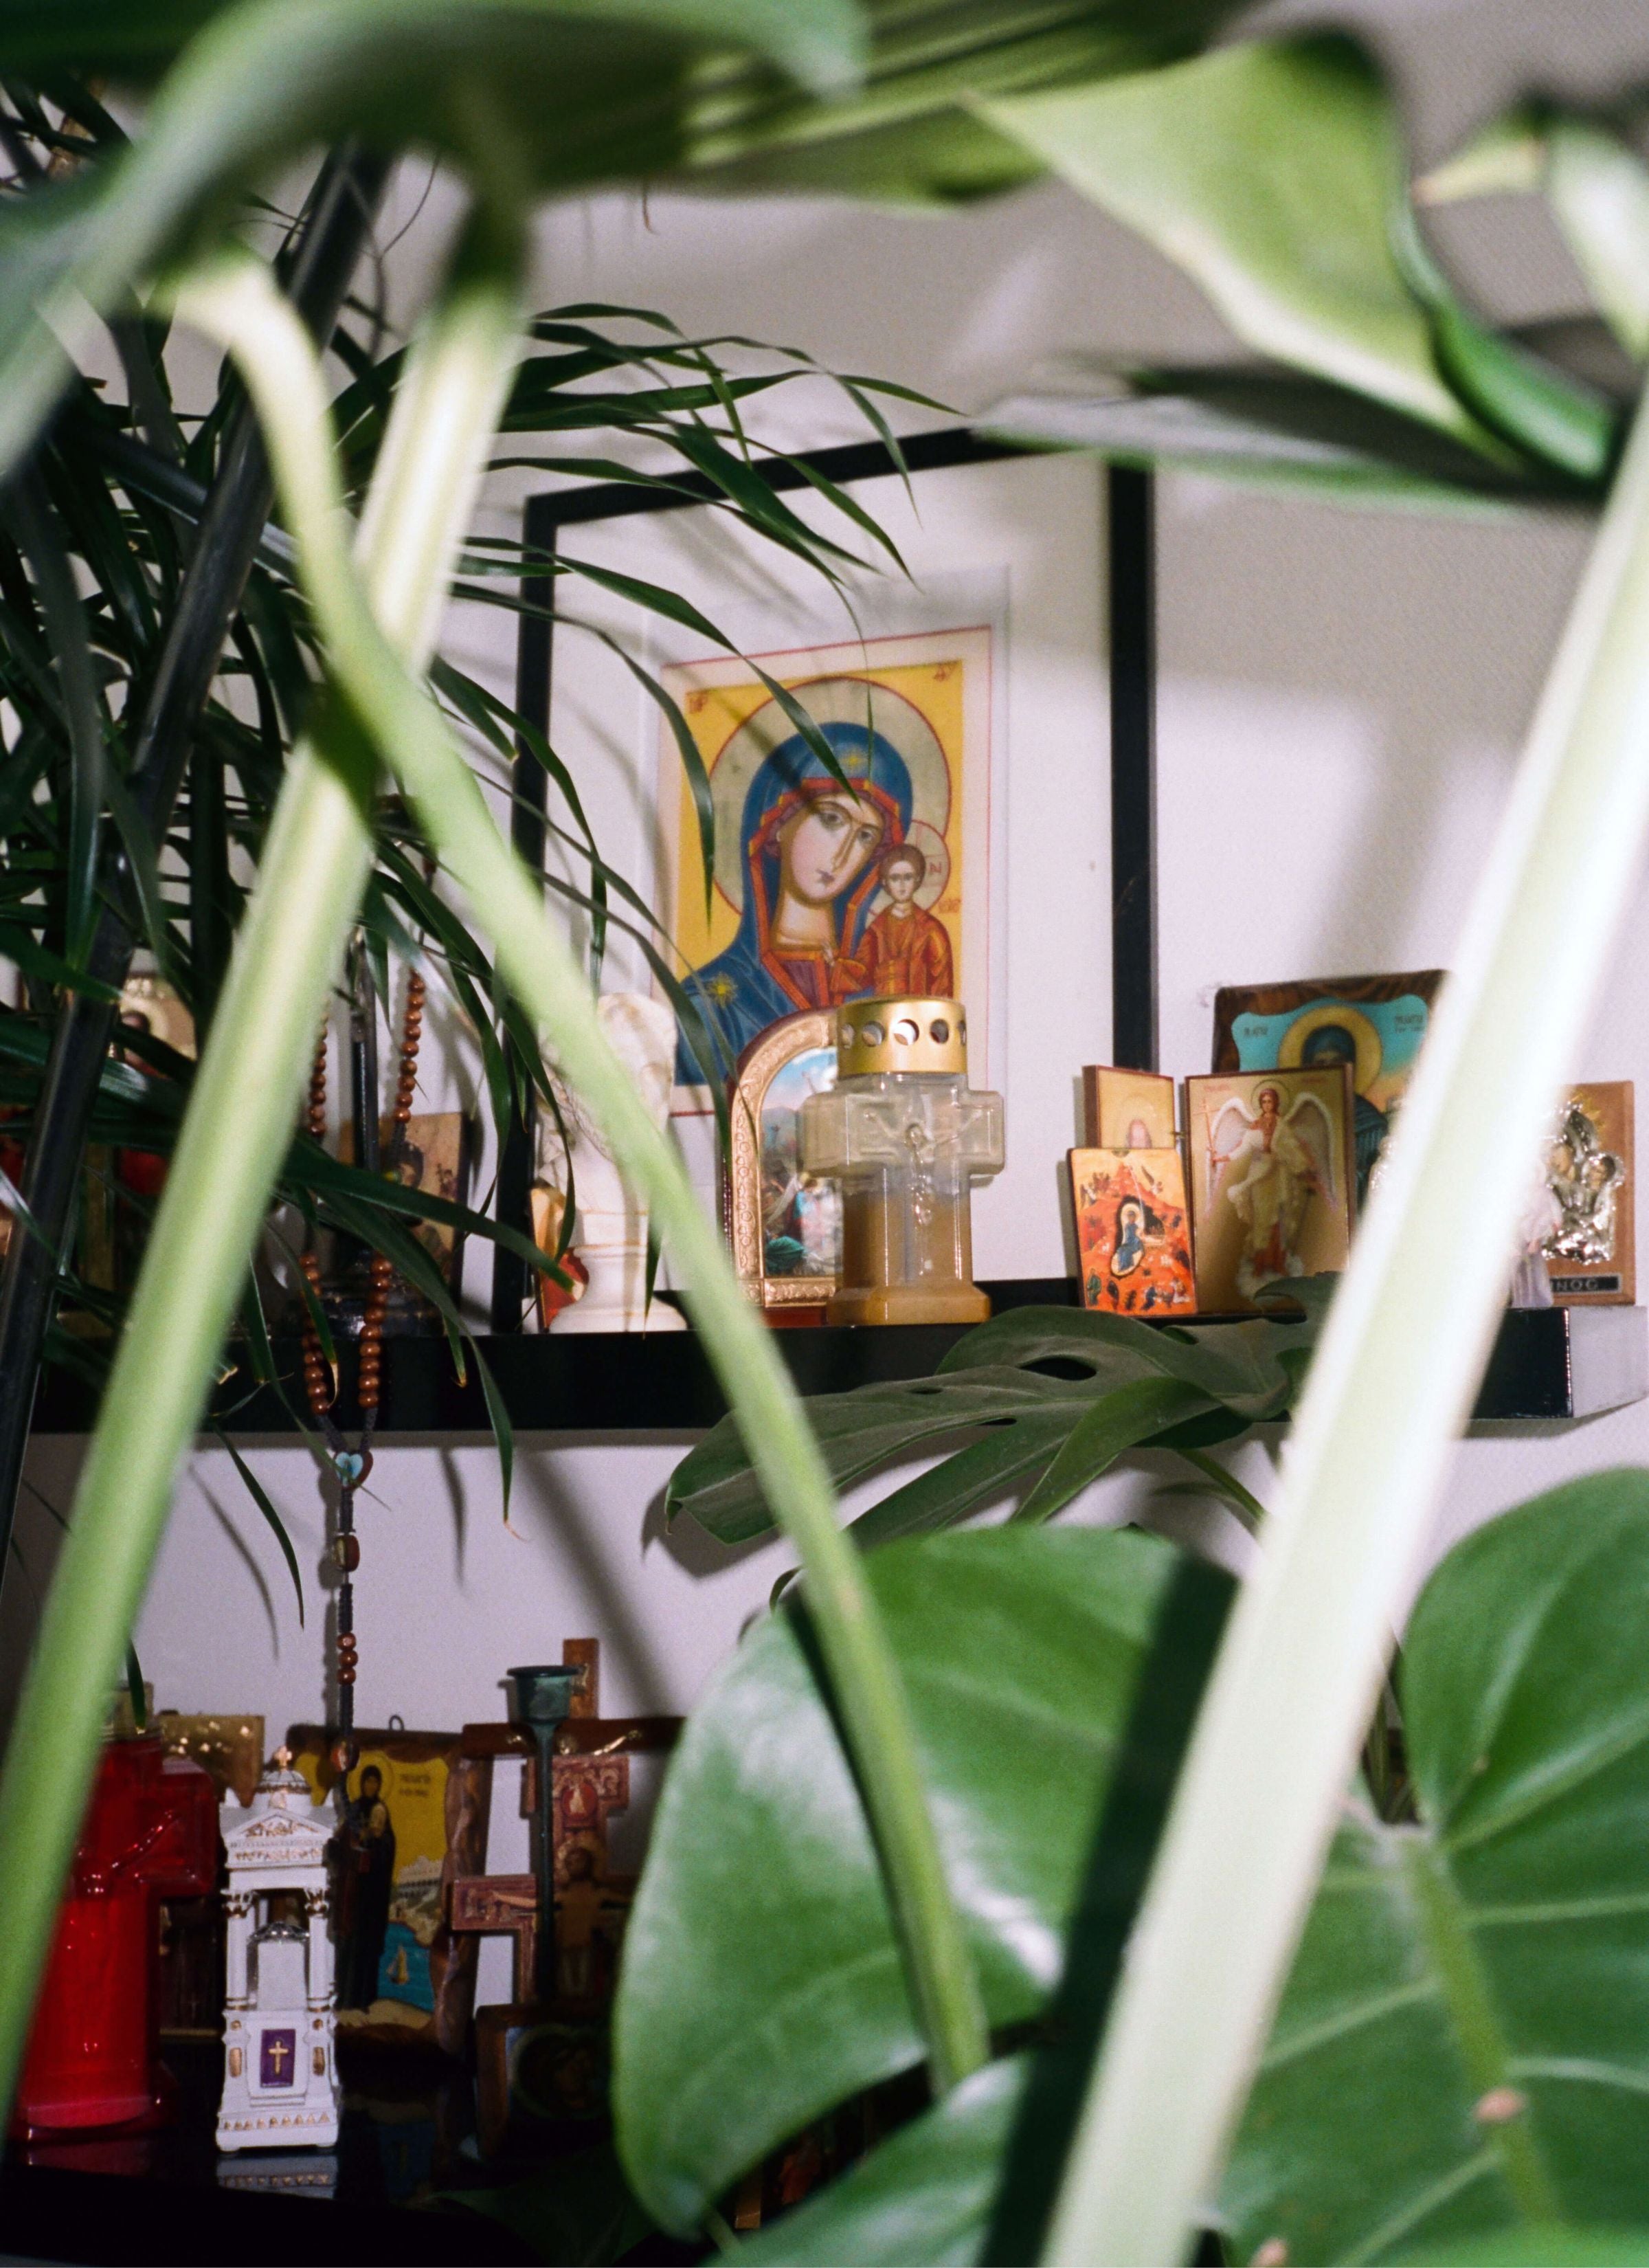 A close-up photograph showcases lush monstera leaves in the foreground, framing the composition. In the background, a cupboard leans against the wall, adorned with numerous framed religious images. Various decorations and objects adorn the cupboard's surface, adding visual interest to the scene. The combination of verdant foliage and religious iconography creates a captivating and contemplative atmosphere.